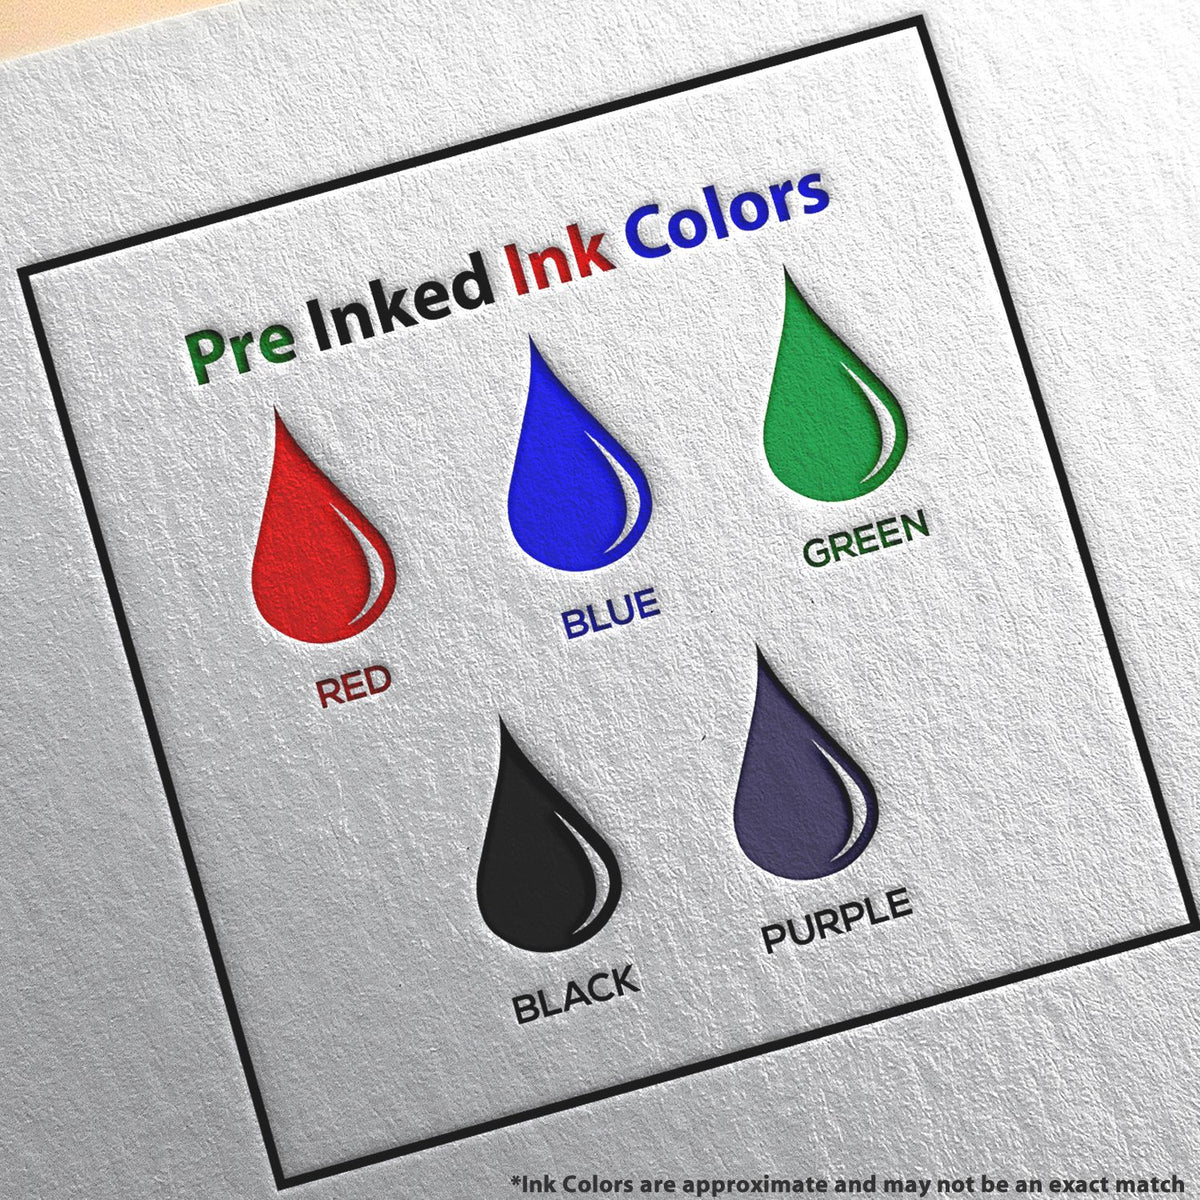 A picture showing the different ink colors or hues available for the Slim Pre-Inked Idaho Landscape Architect Seal Stamp product.